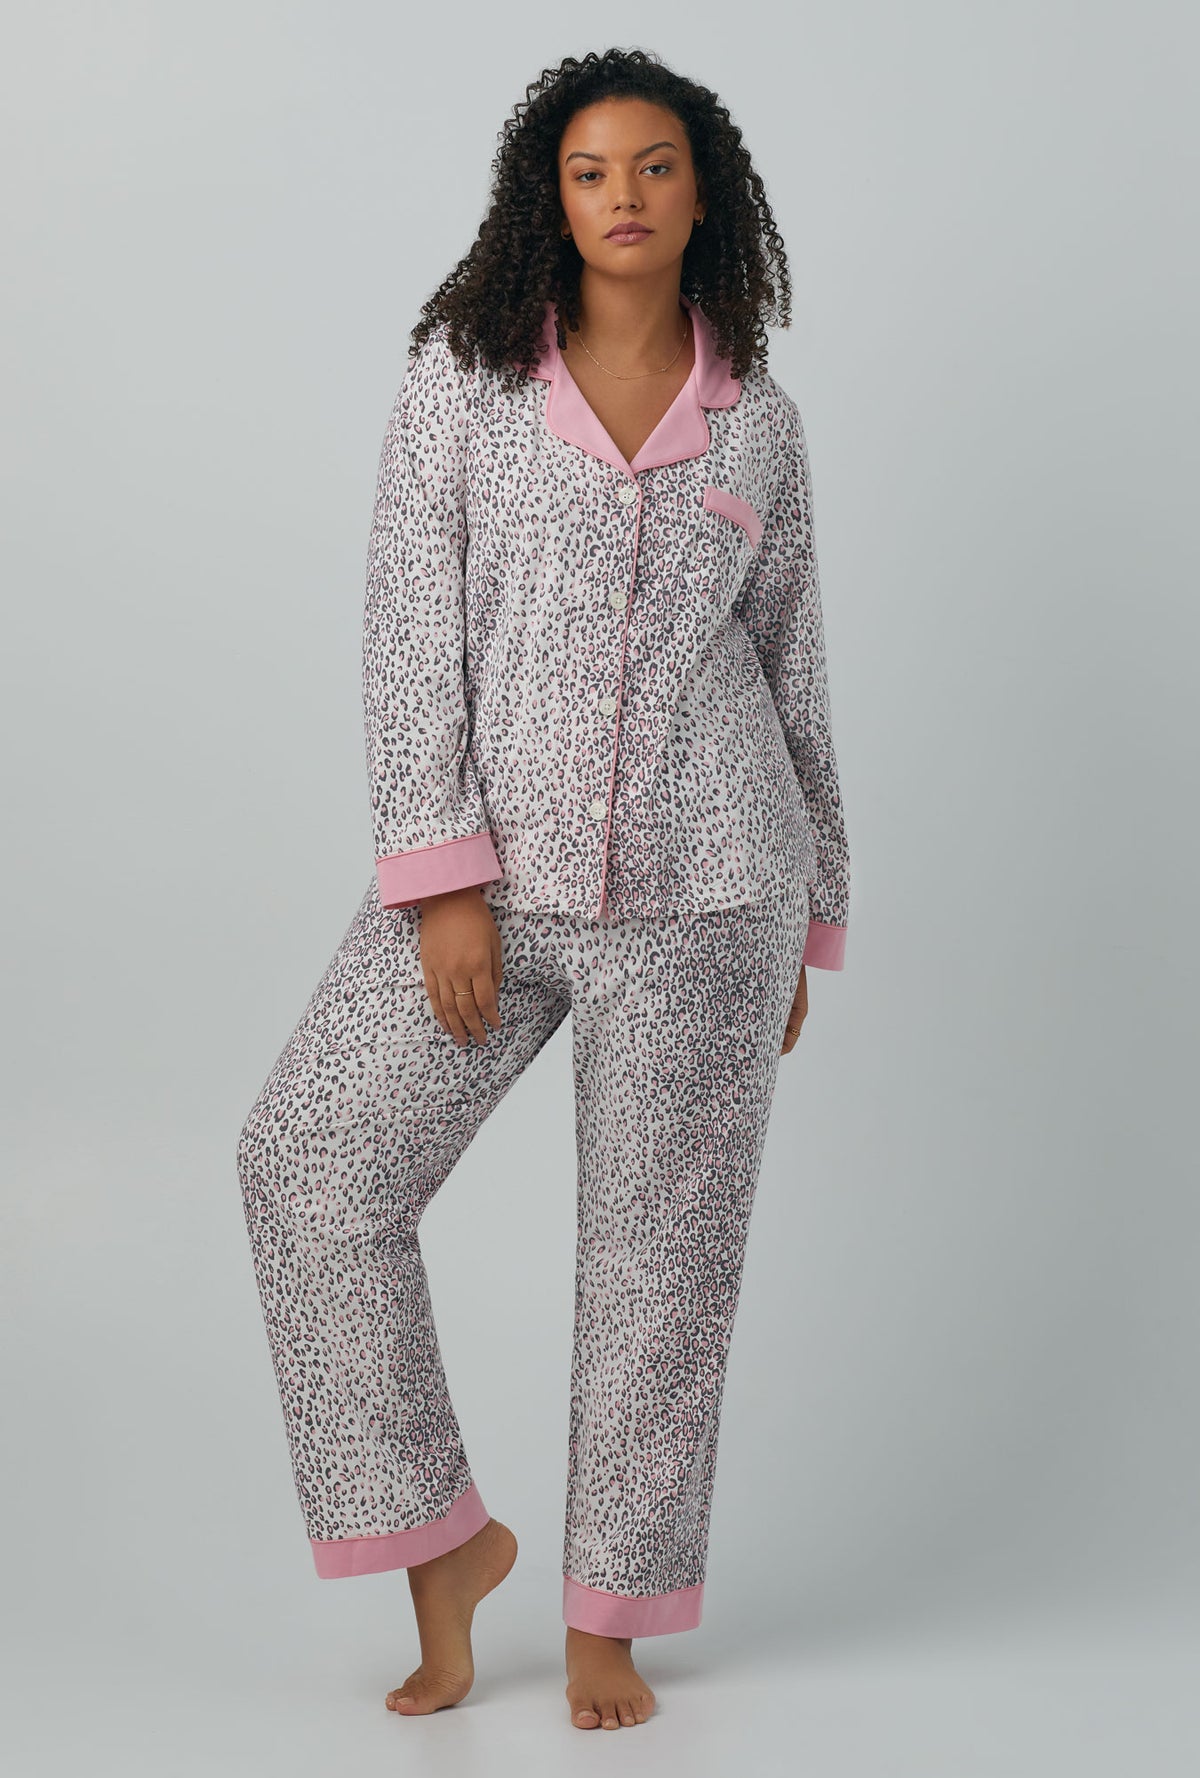 A lady wearing Long Sleeve Classic Stretch Jersey PJ Set with spa kitten print